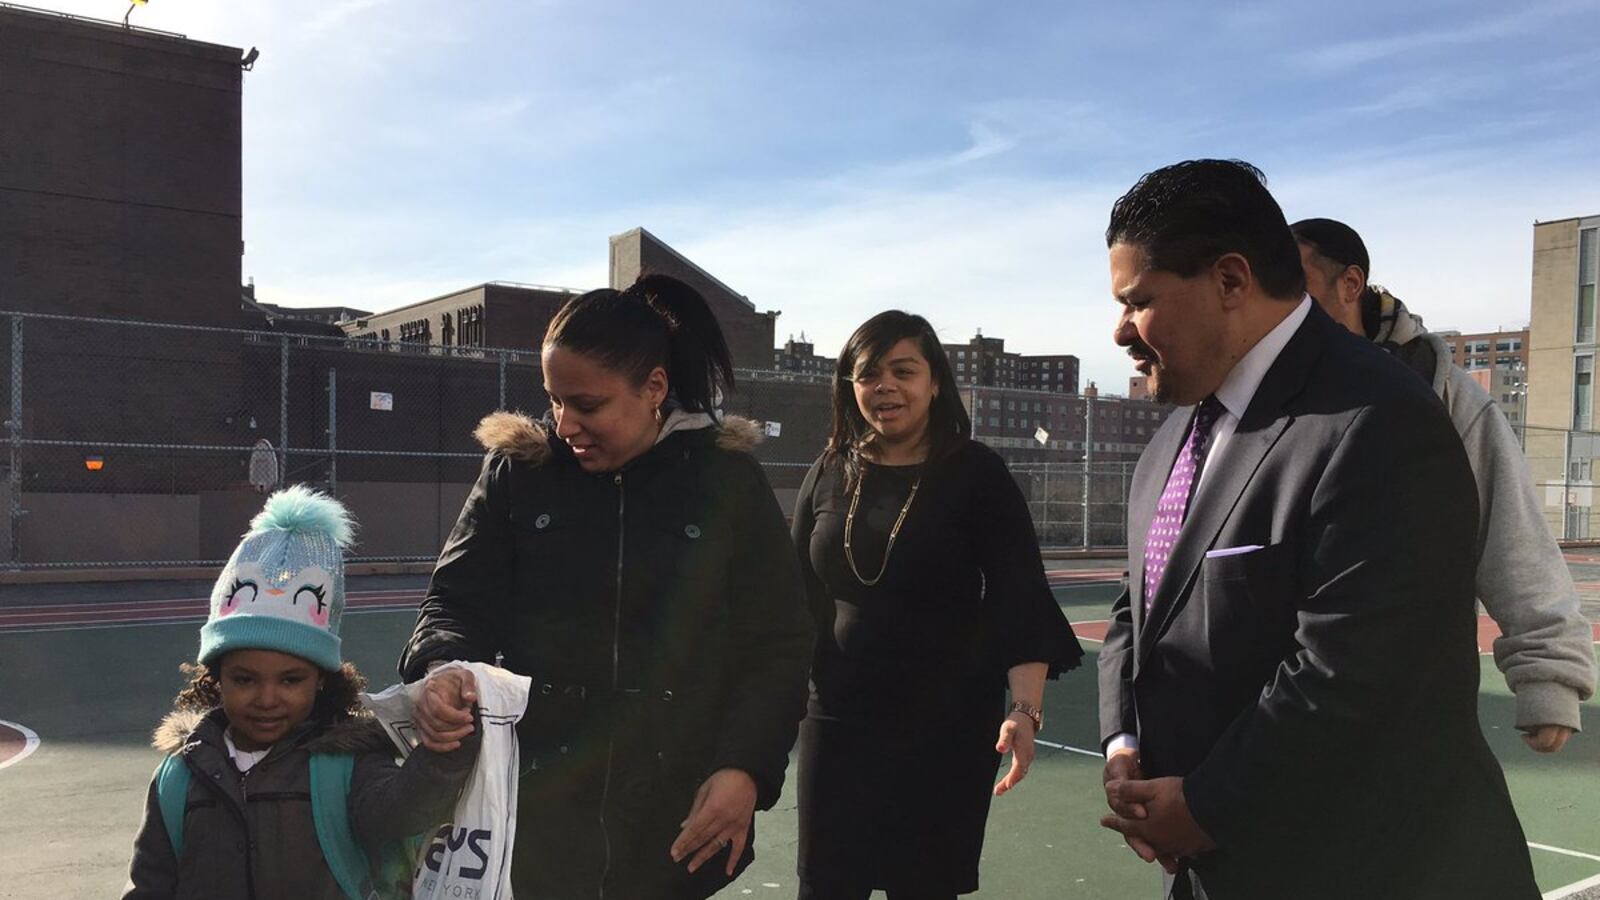 Chancellor Richard Carranza greeted families outside Concourse Village Elementary School in the Bronx on his first official school visit.